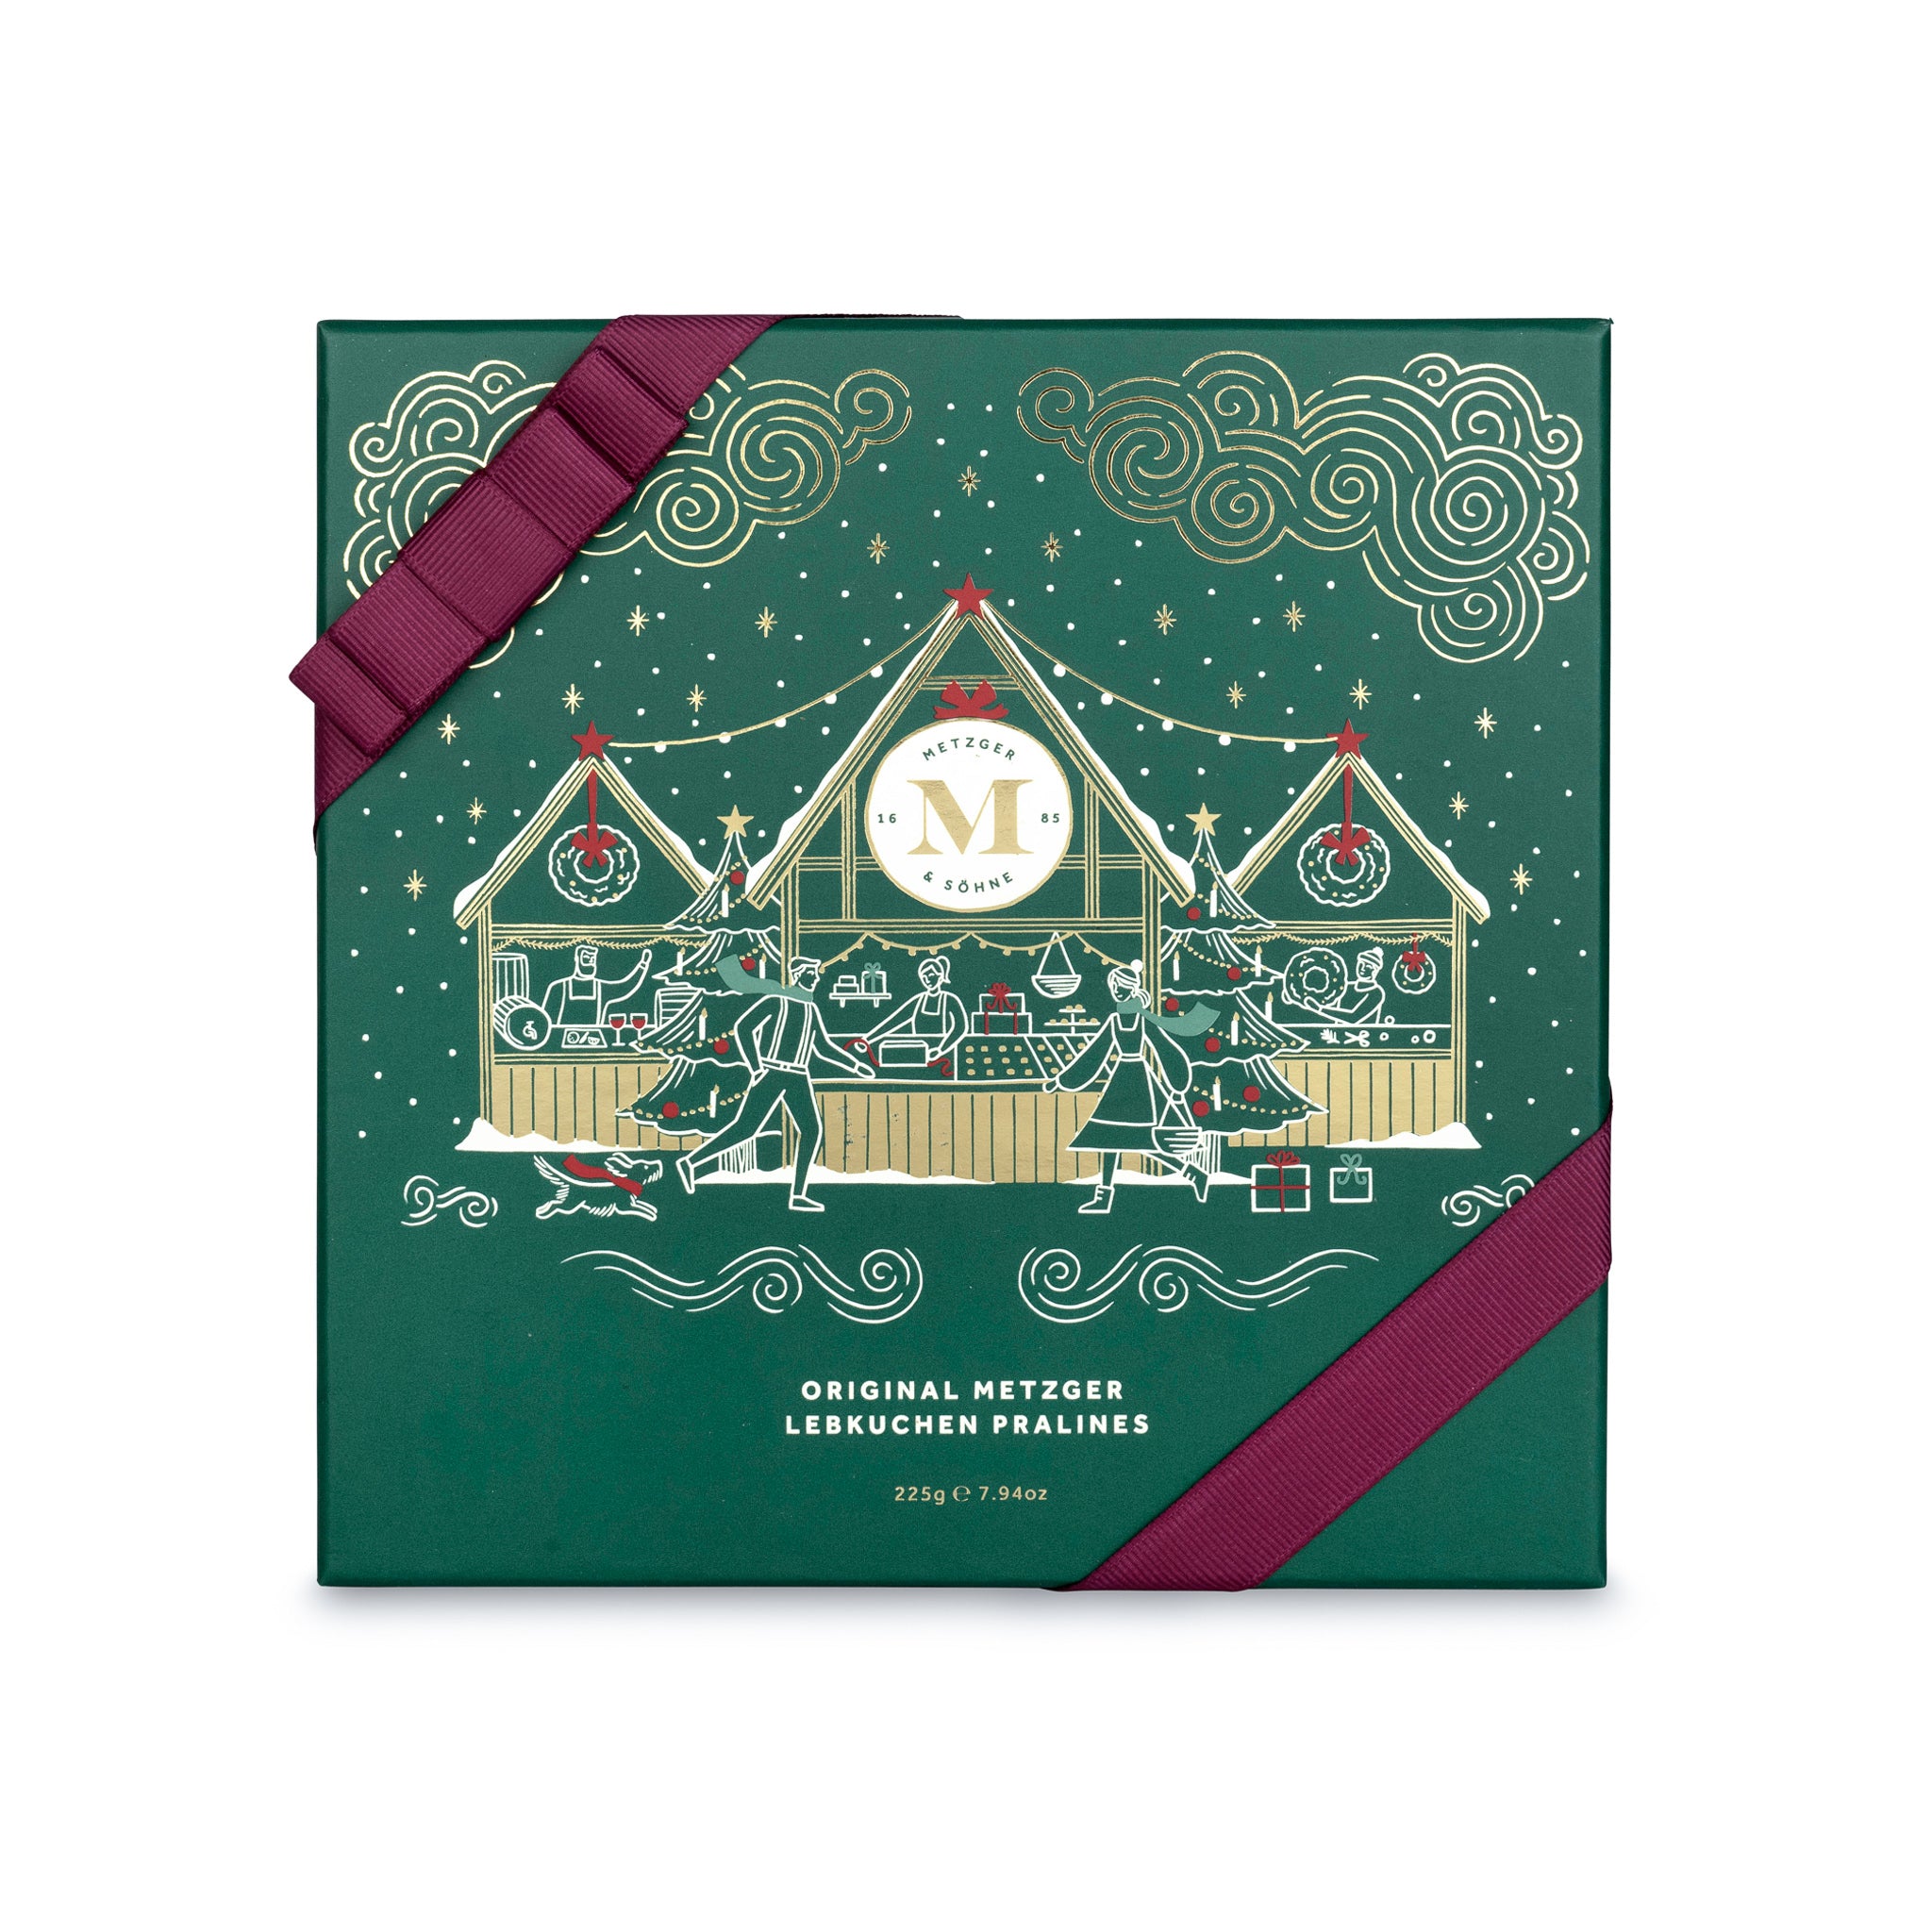 Exclusive Christmas Lebkuchen 'Honey cake' praline box in emerald green with magical gold foil print, filled with 16 exquisite Lebkuchen pralines: marzipan, fruit jam or jelly and nutty flavours.